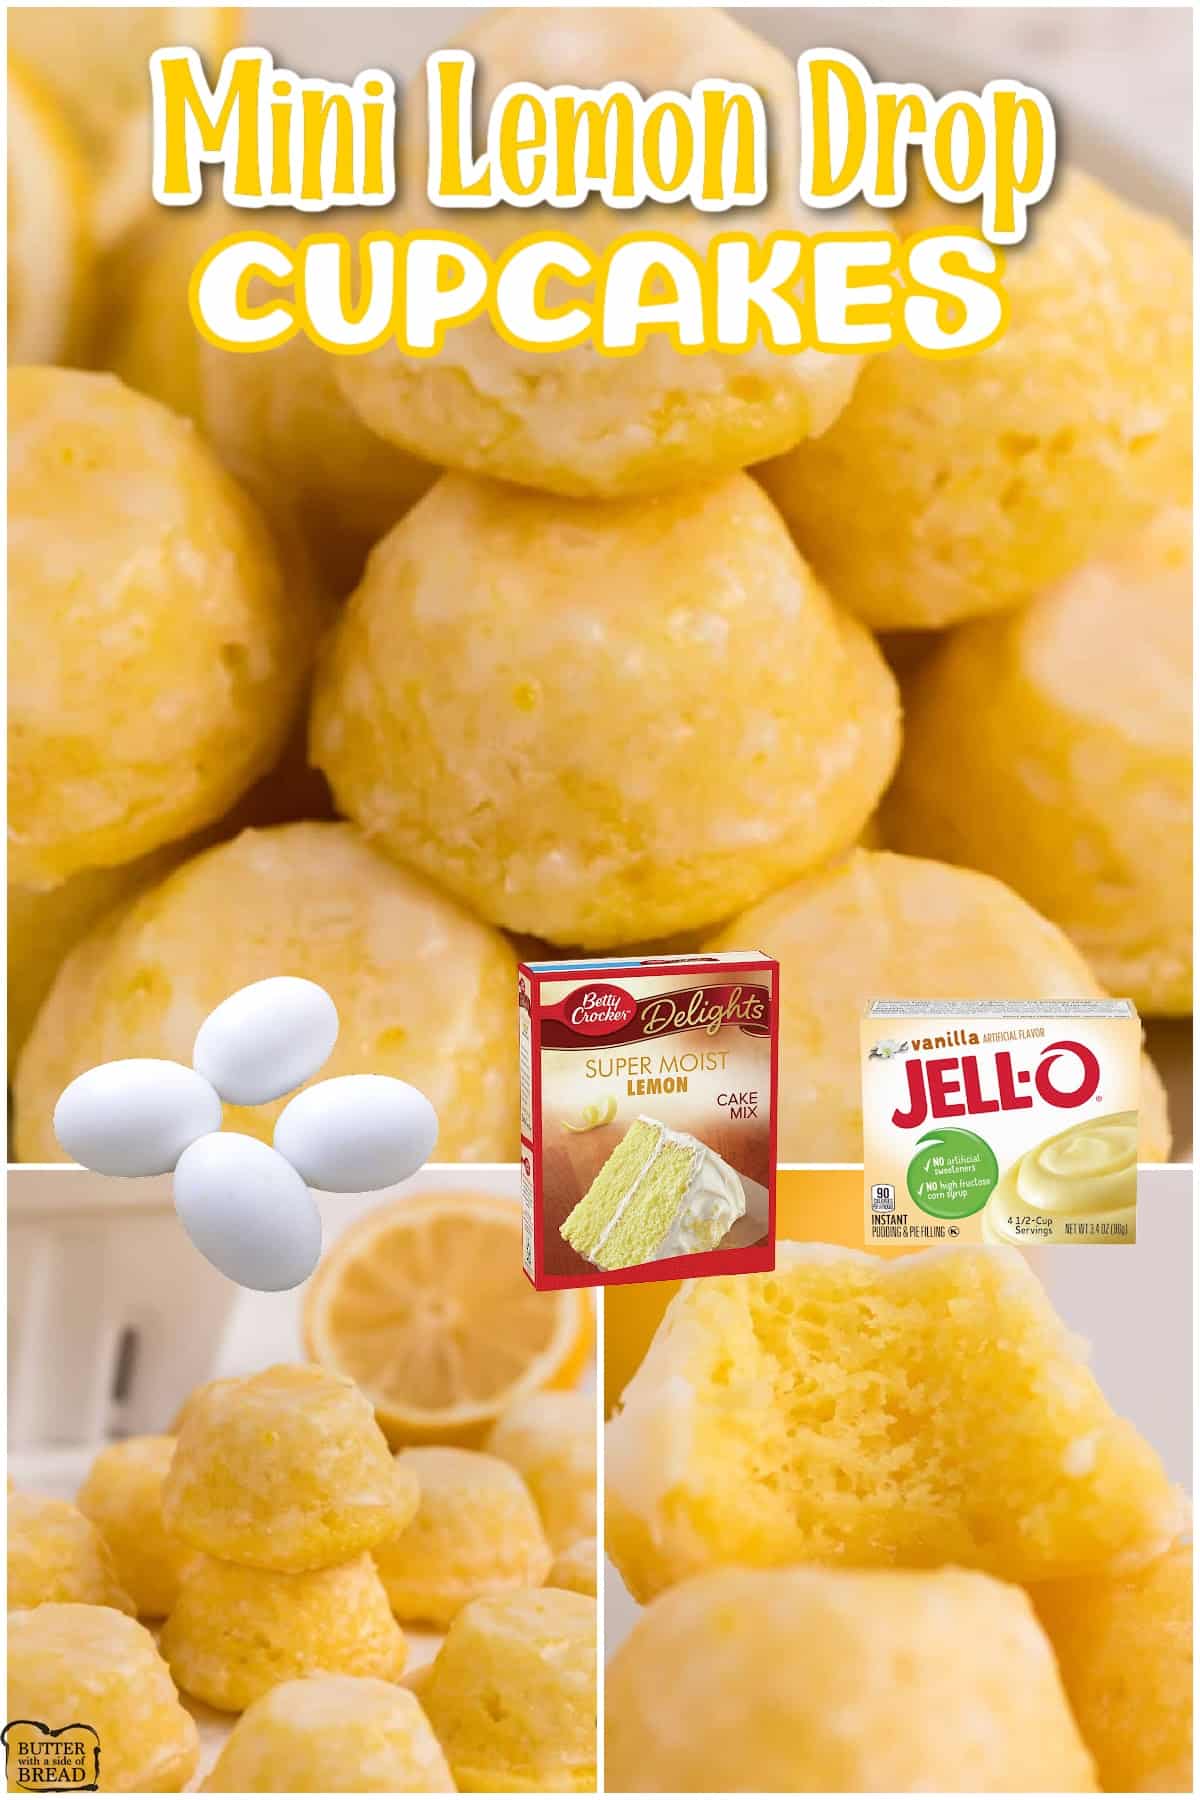 Mini Lemon Drop Cupcakes are delicious bite-sized treats that start with a lemon cake mix! The easy lemon glaze soaks into the bottoms to make these little cupcakes even more incredible. 